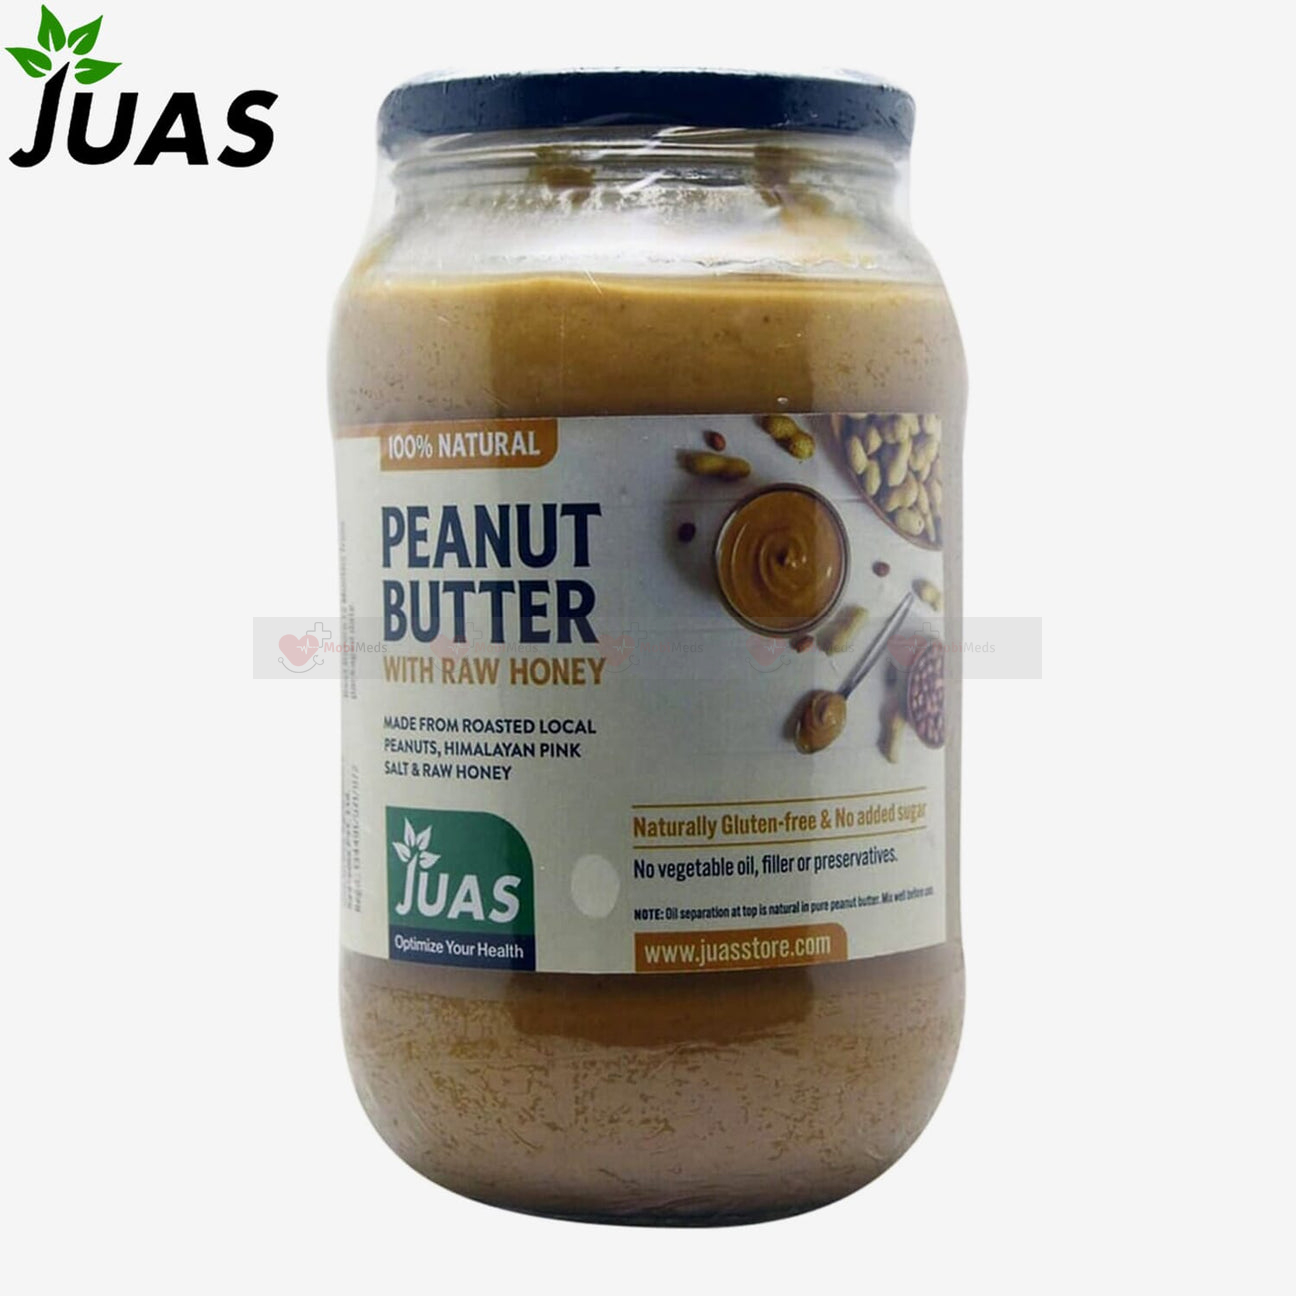 JUAS Peanut Butter with Honey All Natural 1kg